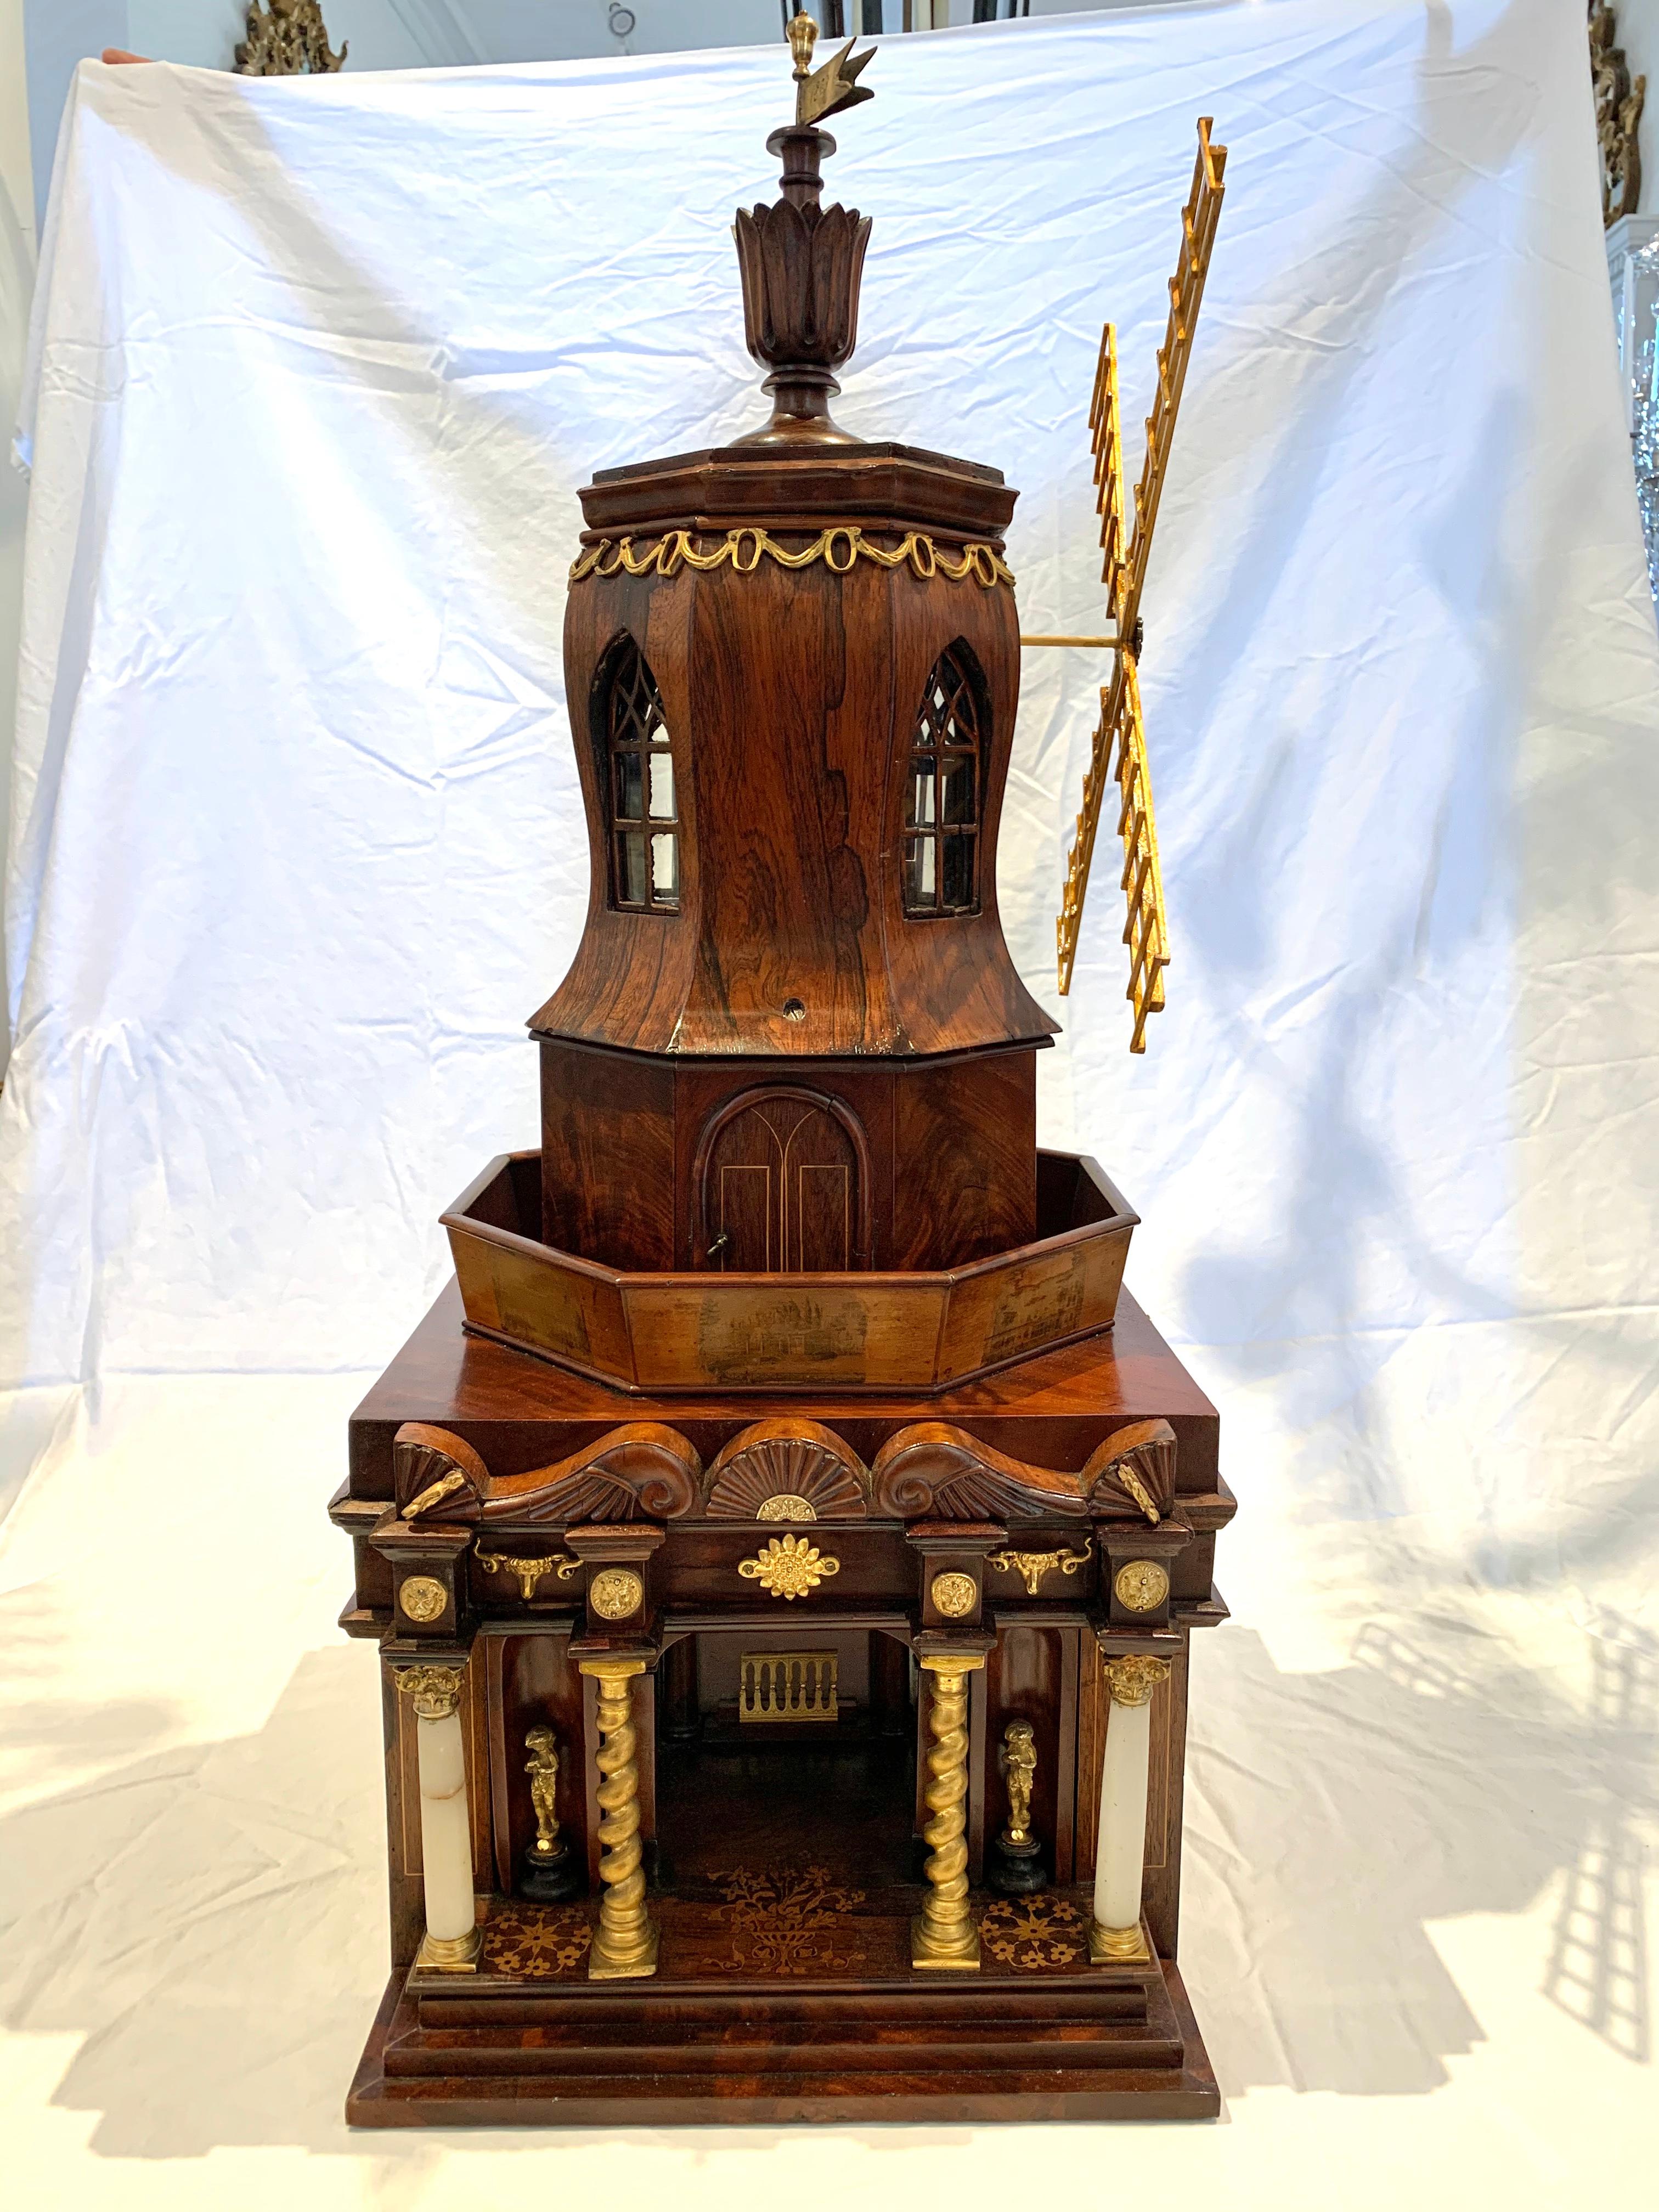 Rare early 19th century working automaton sewing box with hidden compartments for necessaries and sewing implements. Original handmade clockwork inside which operates a working windmill. Ormolu mounts and neoclassical temple structure. Stairs